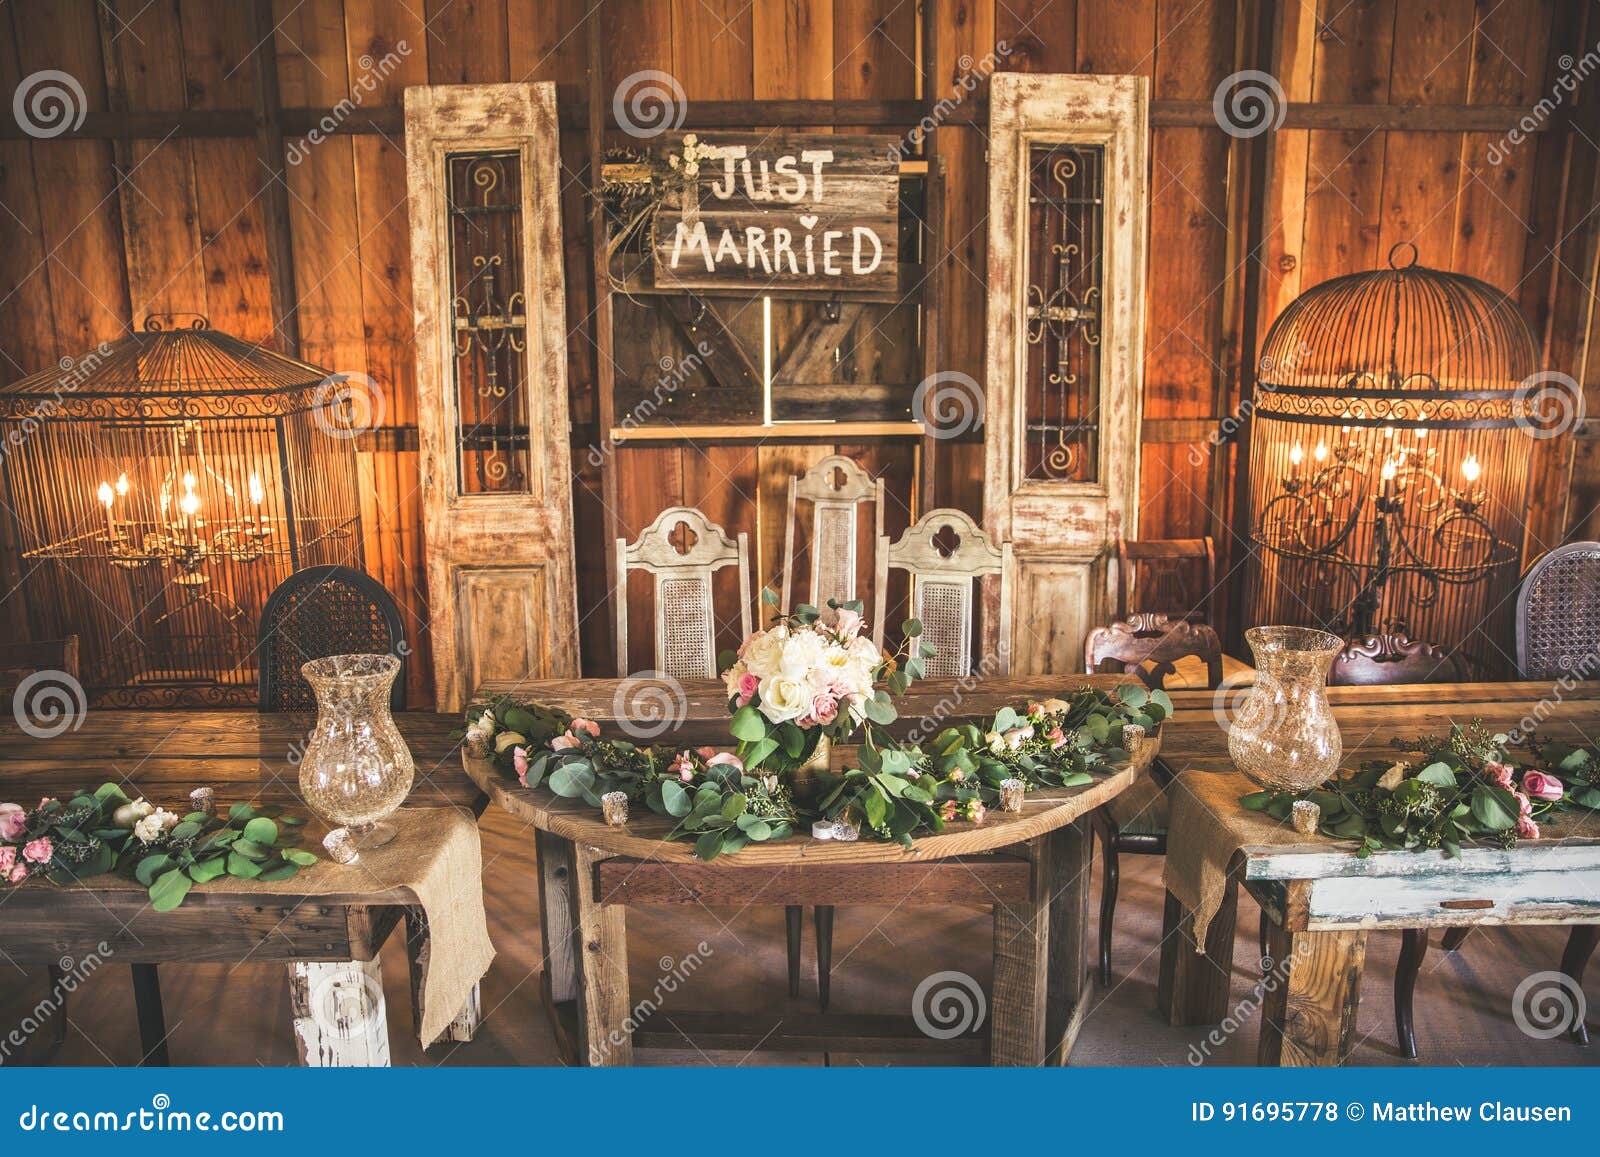 wedding party table in a barn